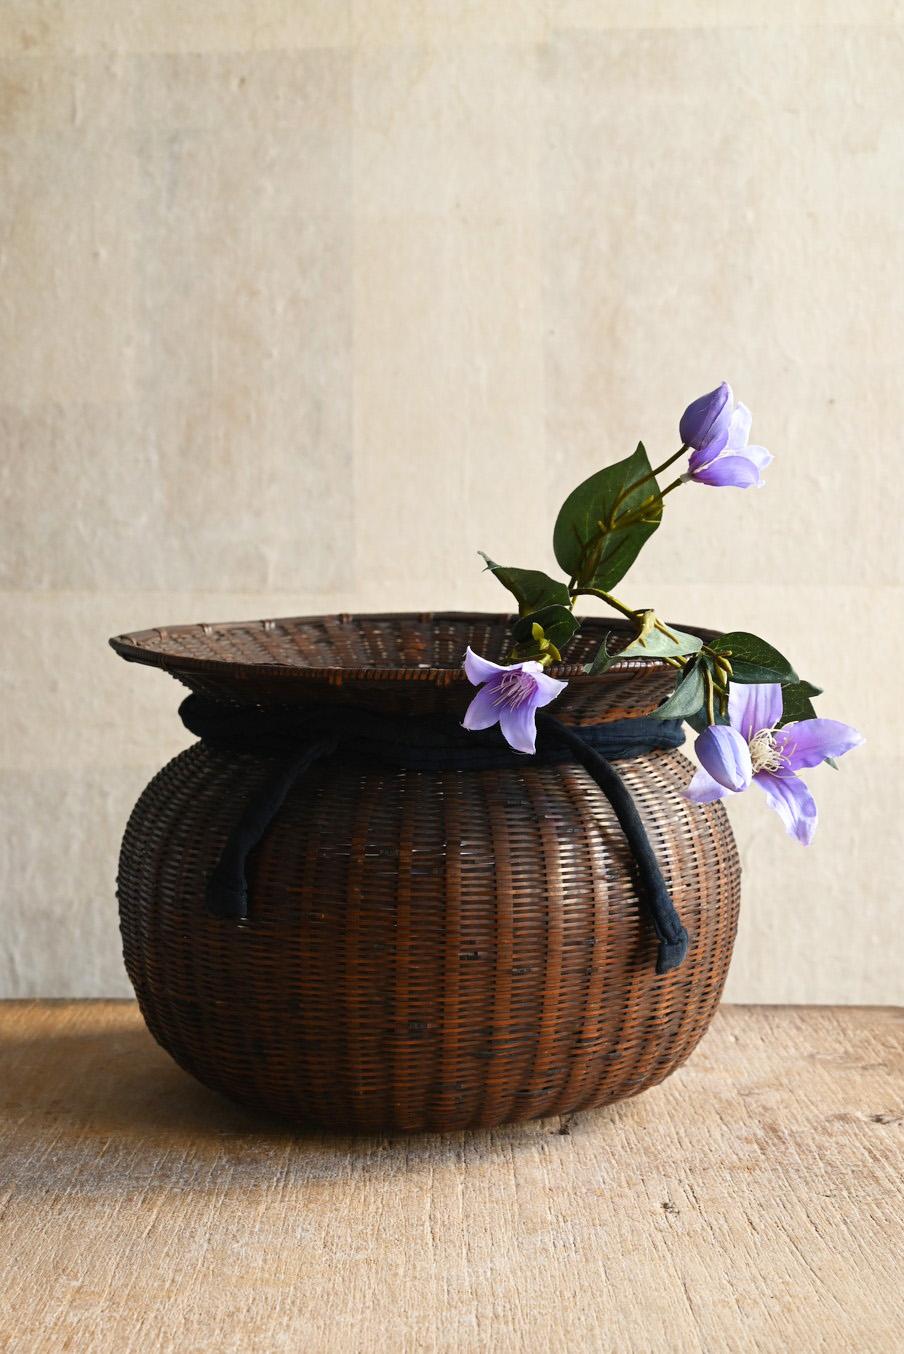 The original use of this basket was as a fish cage for storing caught fish.
This is thought to have been made as a flower vase, imitating that design.
This item is carefully woven using thin bamboo strips.
Over time, it has changed to a glossy brown